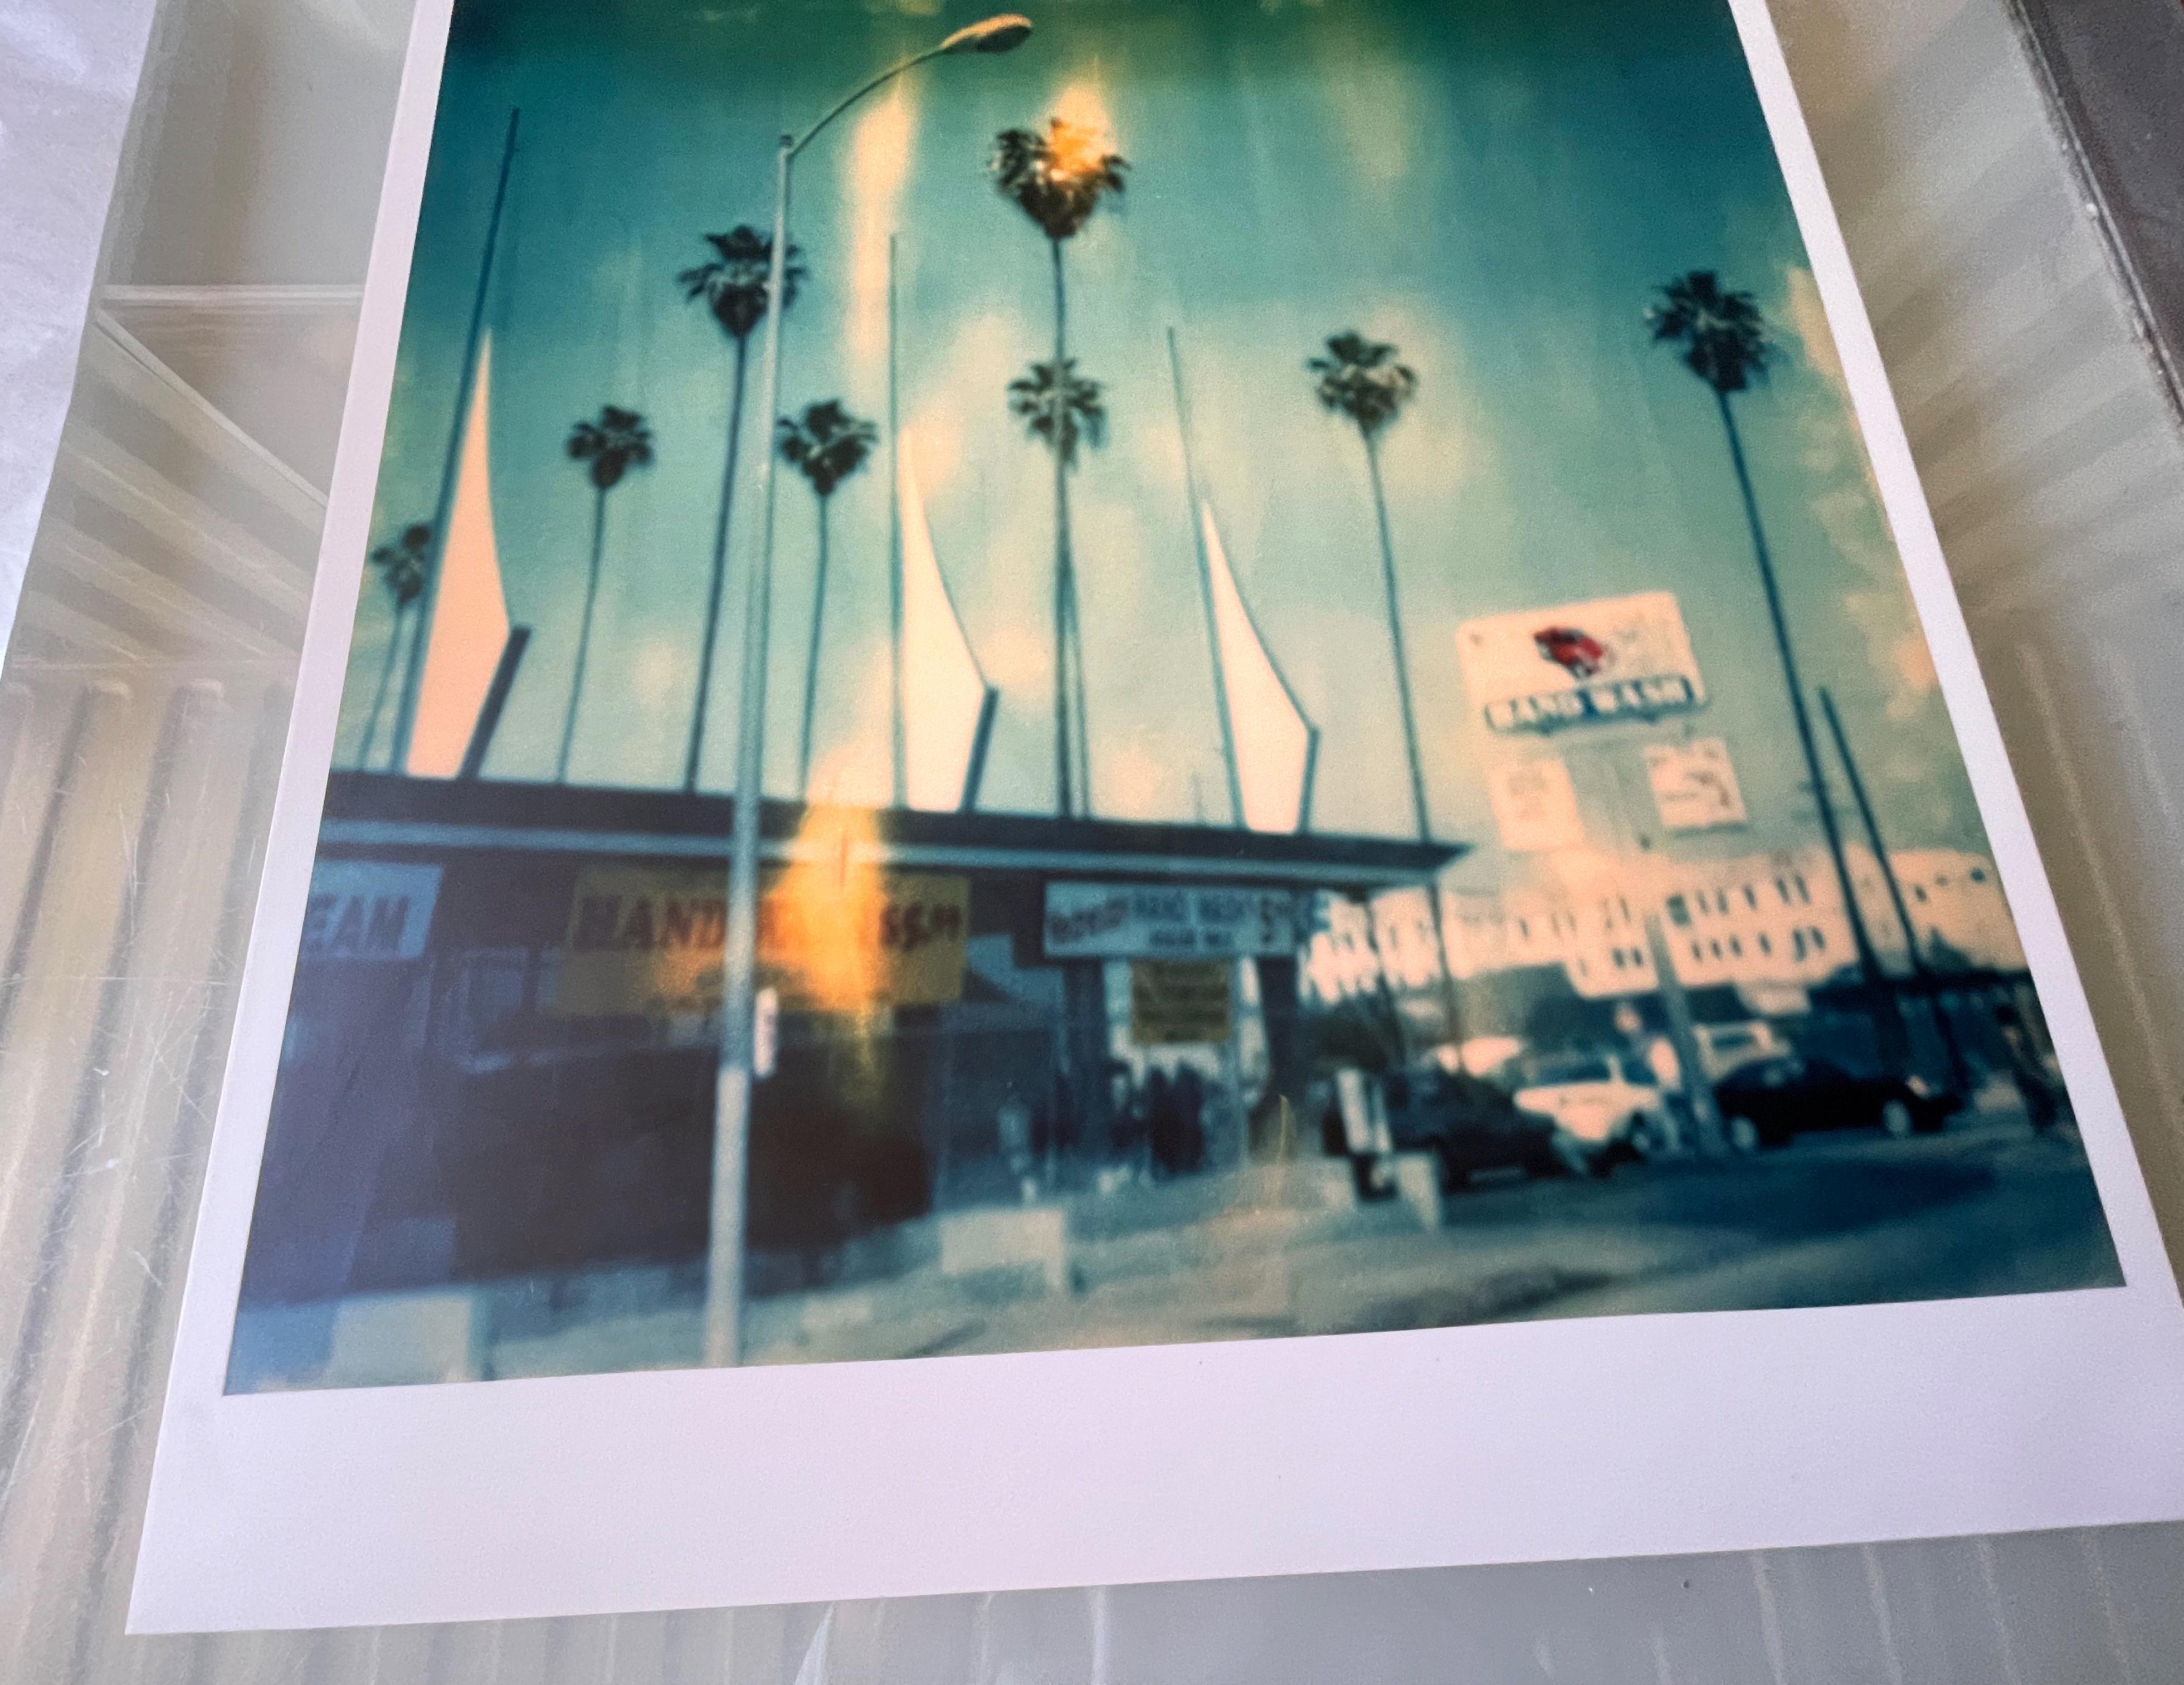 Car Wash (Stranger than Paradise) - 1999

64.6x59.5cm including the white 'Polaroid' frame.  
Edition 2/10. 
Analog C-Print, hand-printed by the artist, 
mounted on Aluminum with matte UV-Protection, based on the original Polaroid. 
Artist inventory